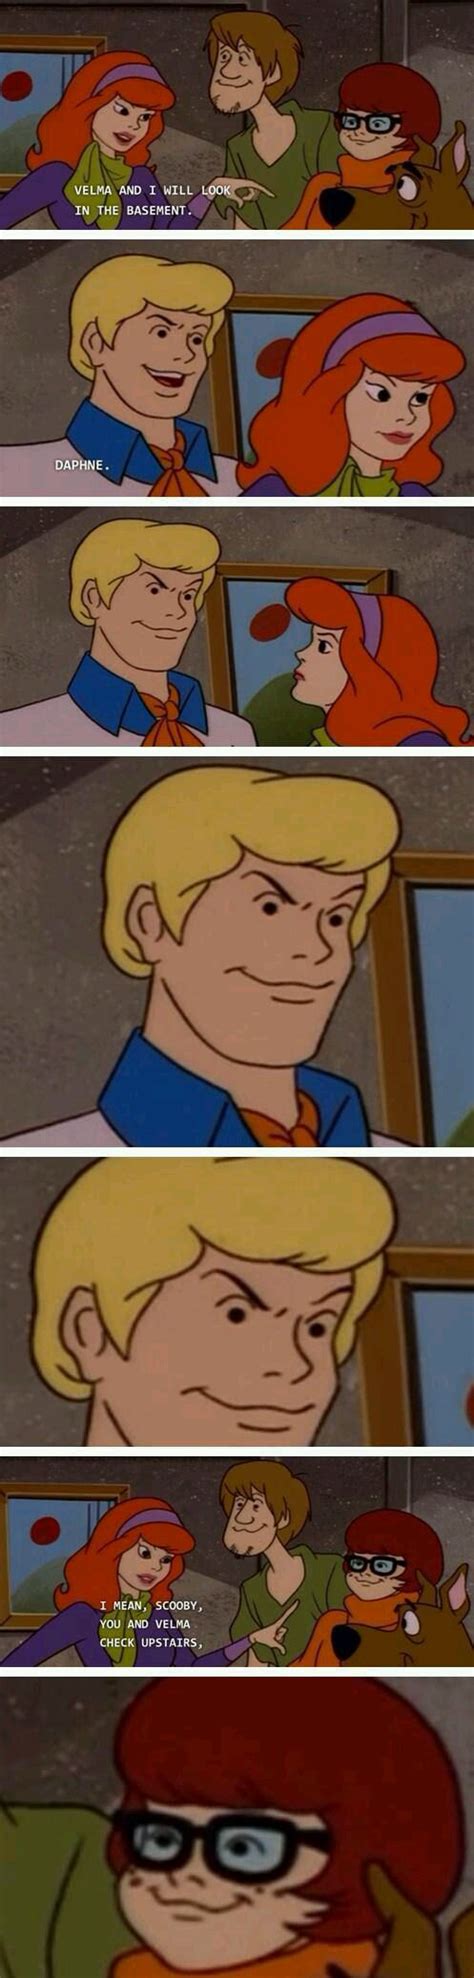 24 Awesome Scooby Doo Memes And Funny Pics To Make You